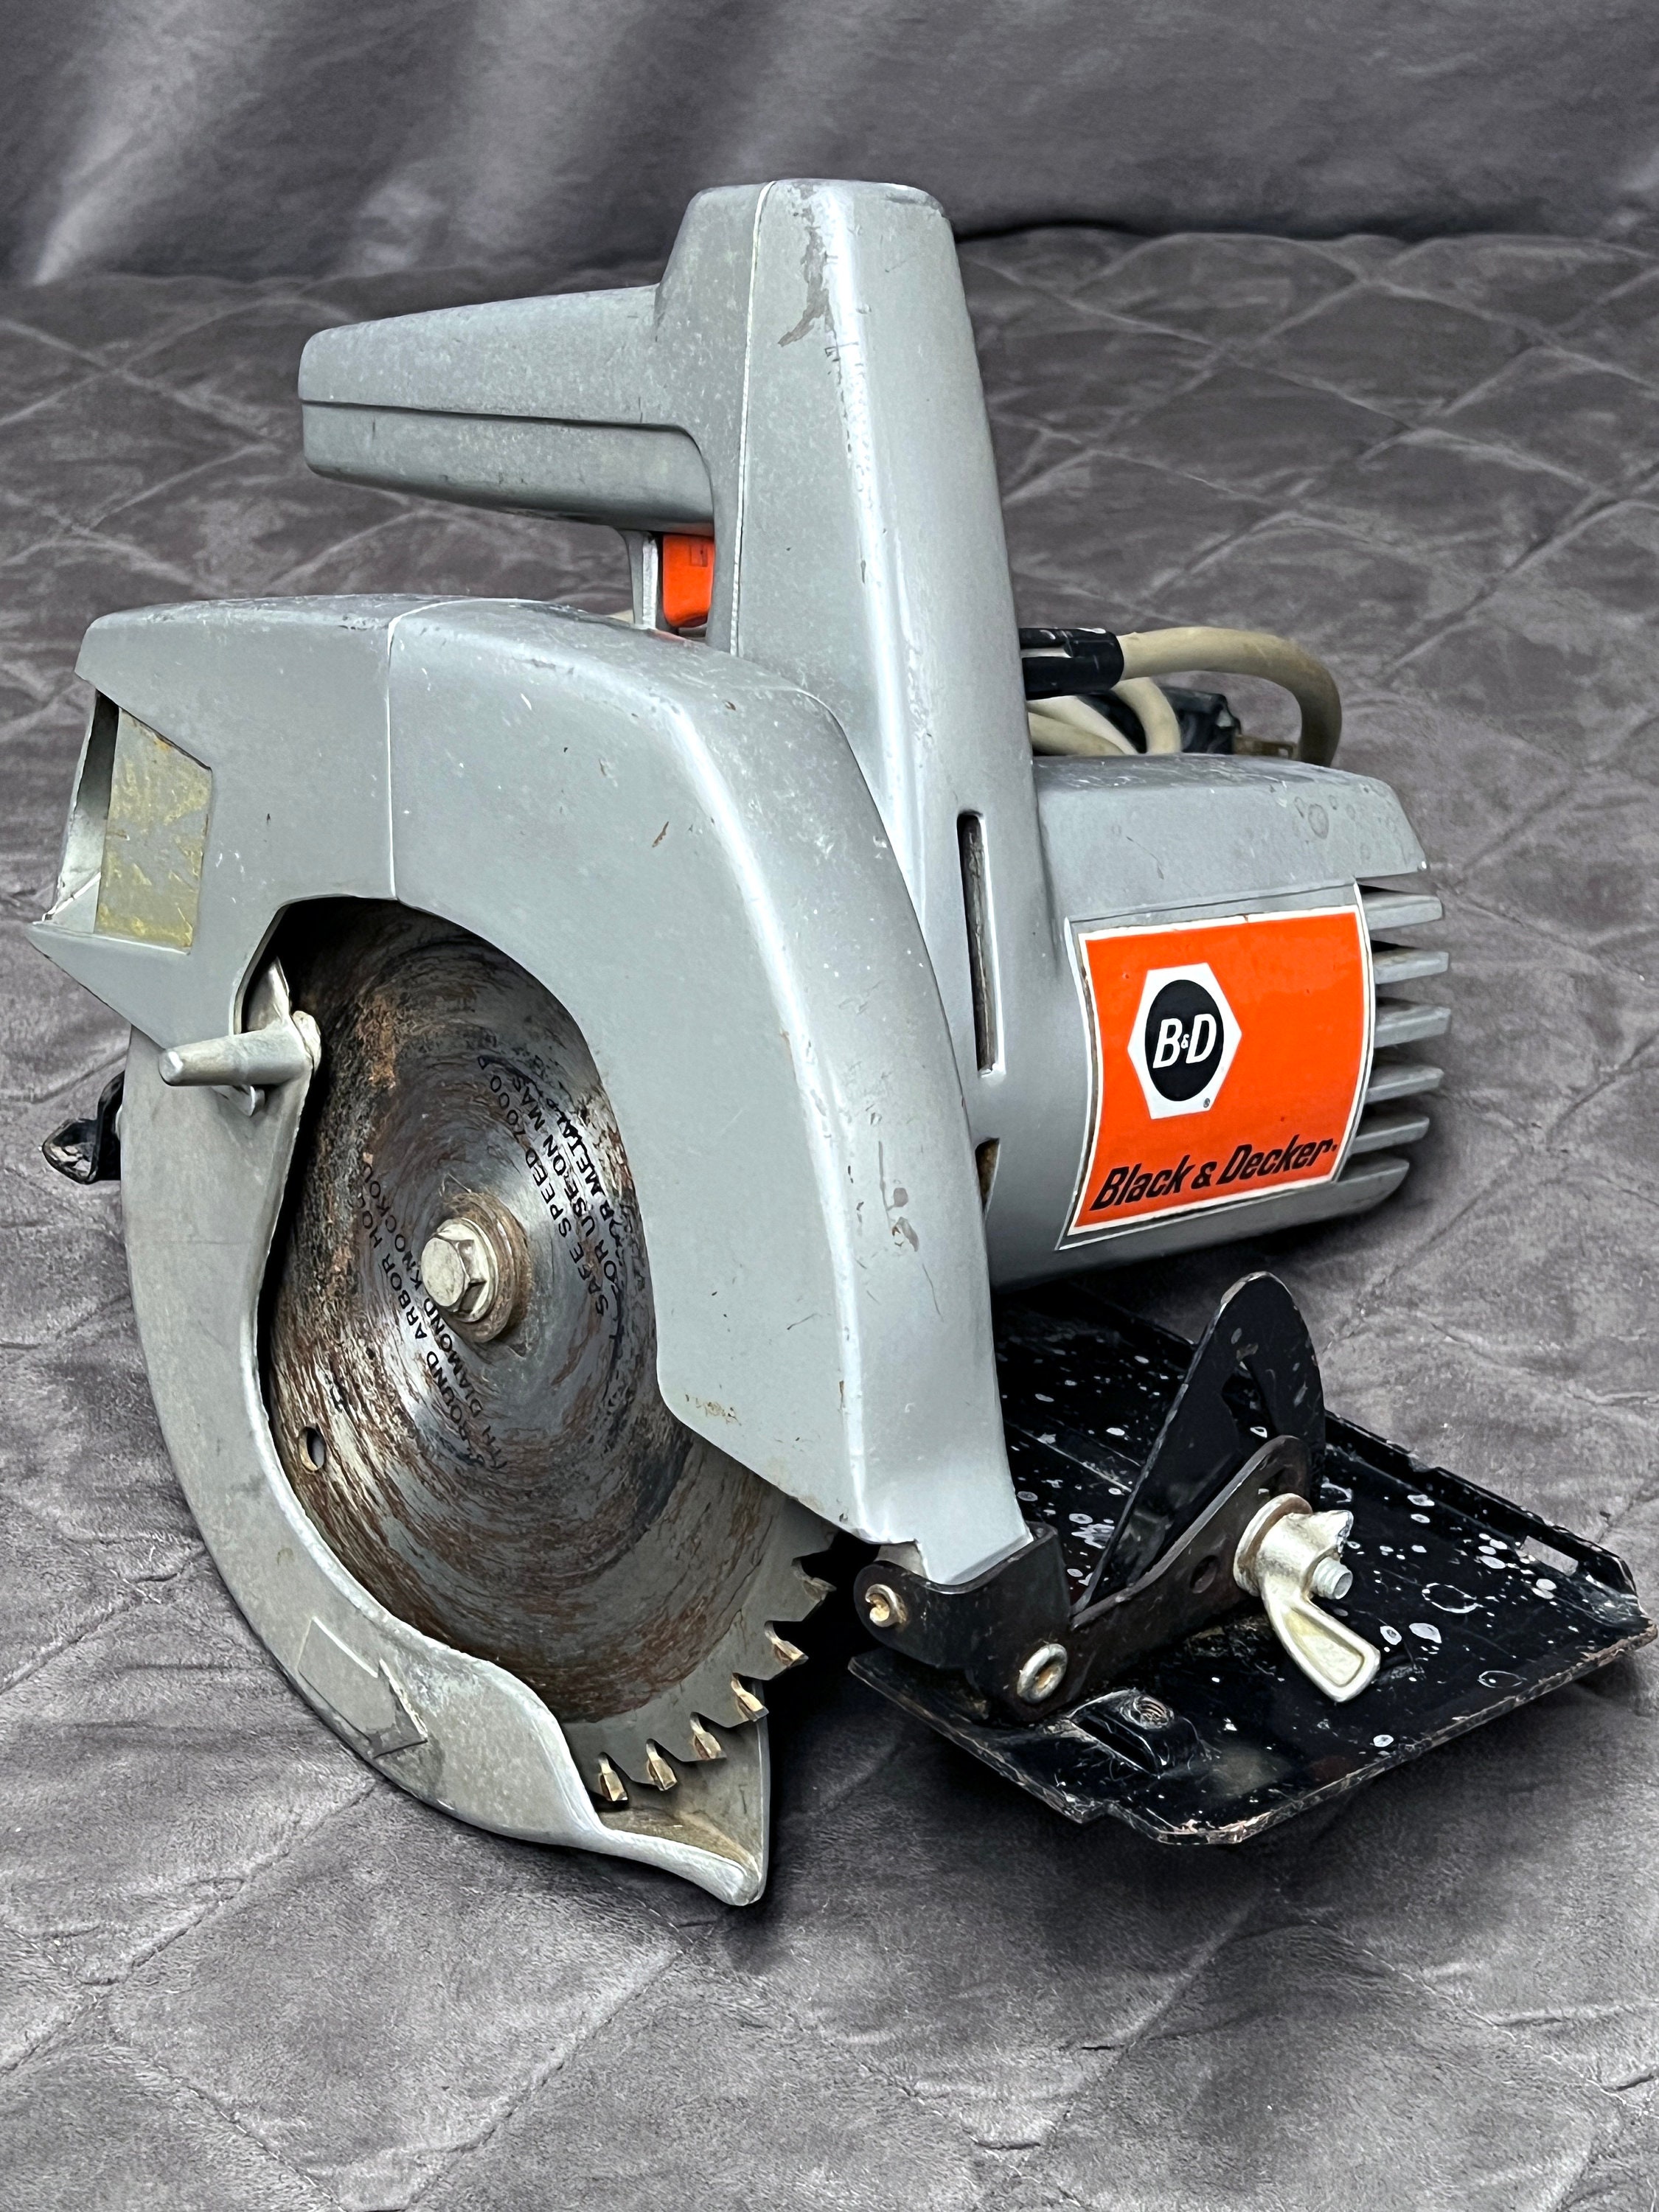 VINTAGE BLACK AND DECKER # 3102-09 2 SPEED HEAVY DUTY RECIPROCATING SAW